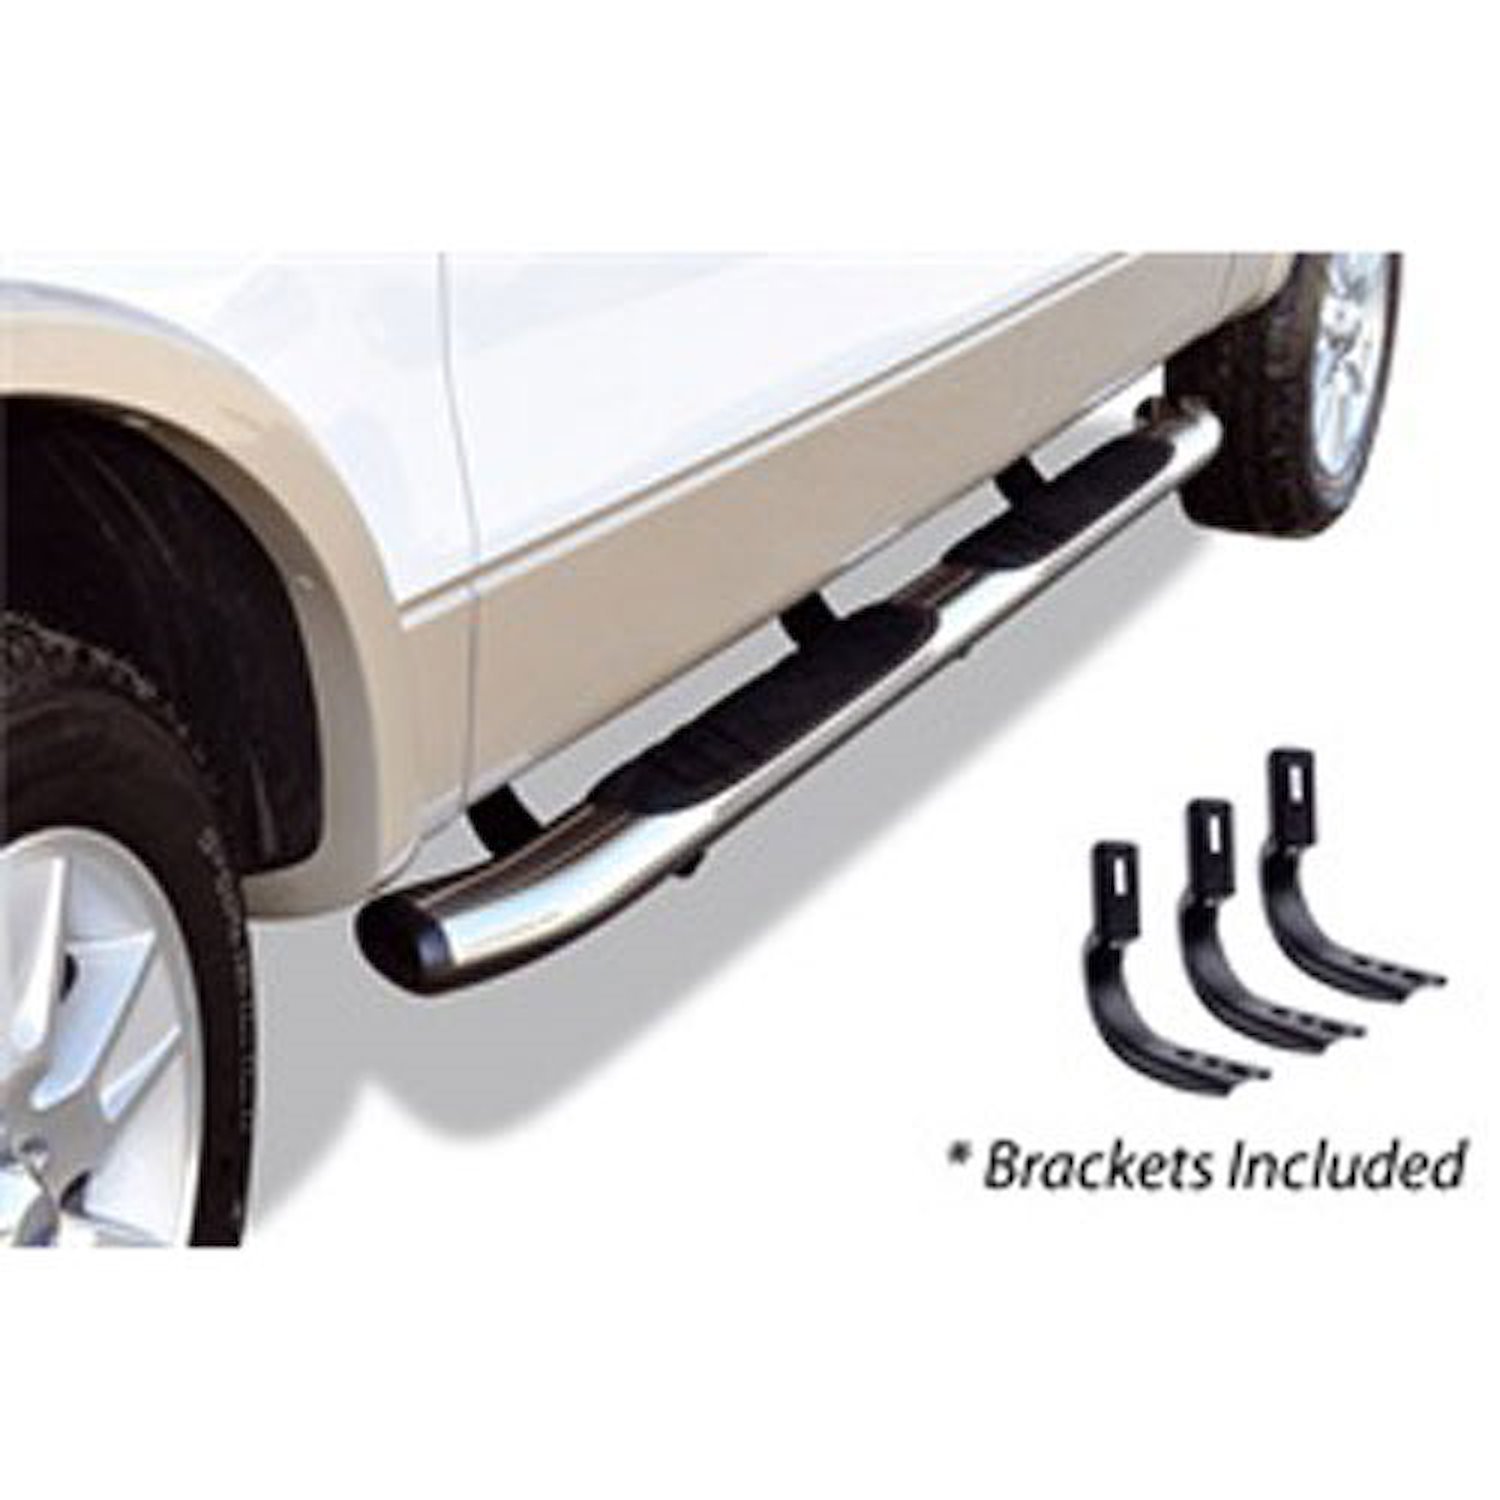 5" OE Xtreme Composite SideSteps Kit 2015-16 Ford F-150